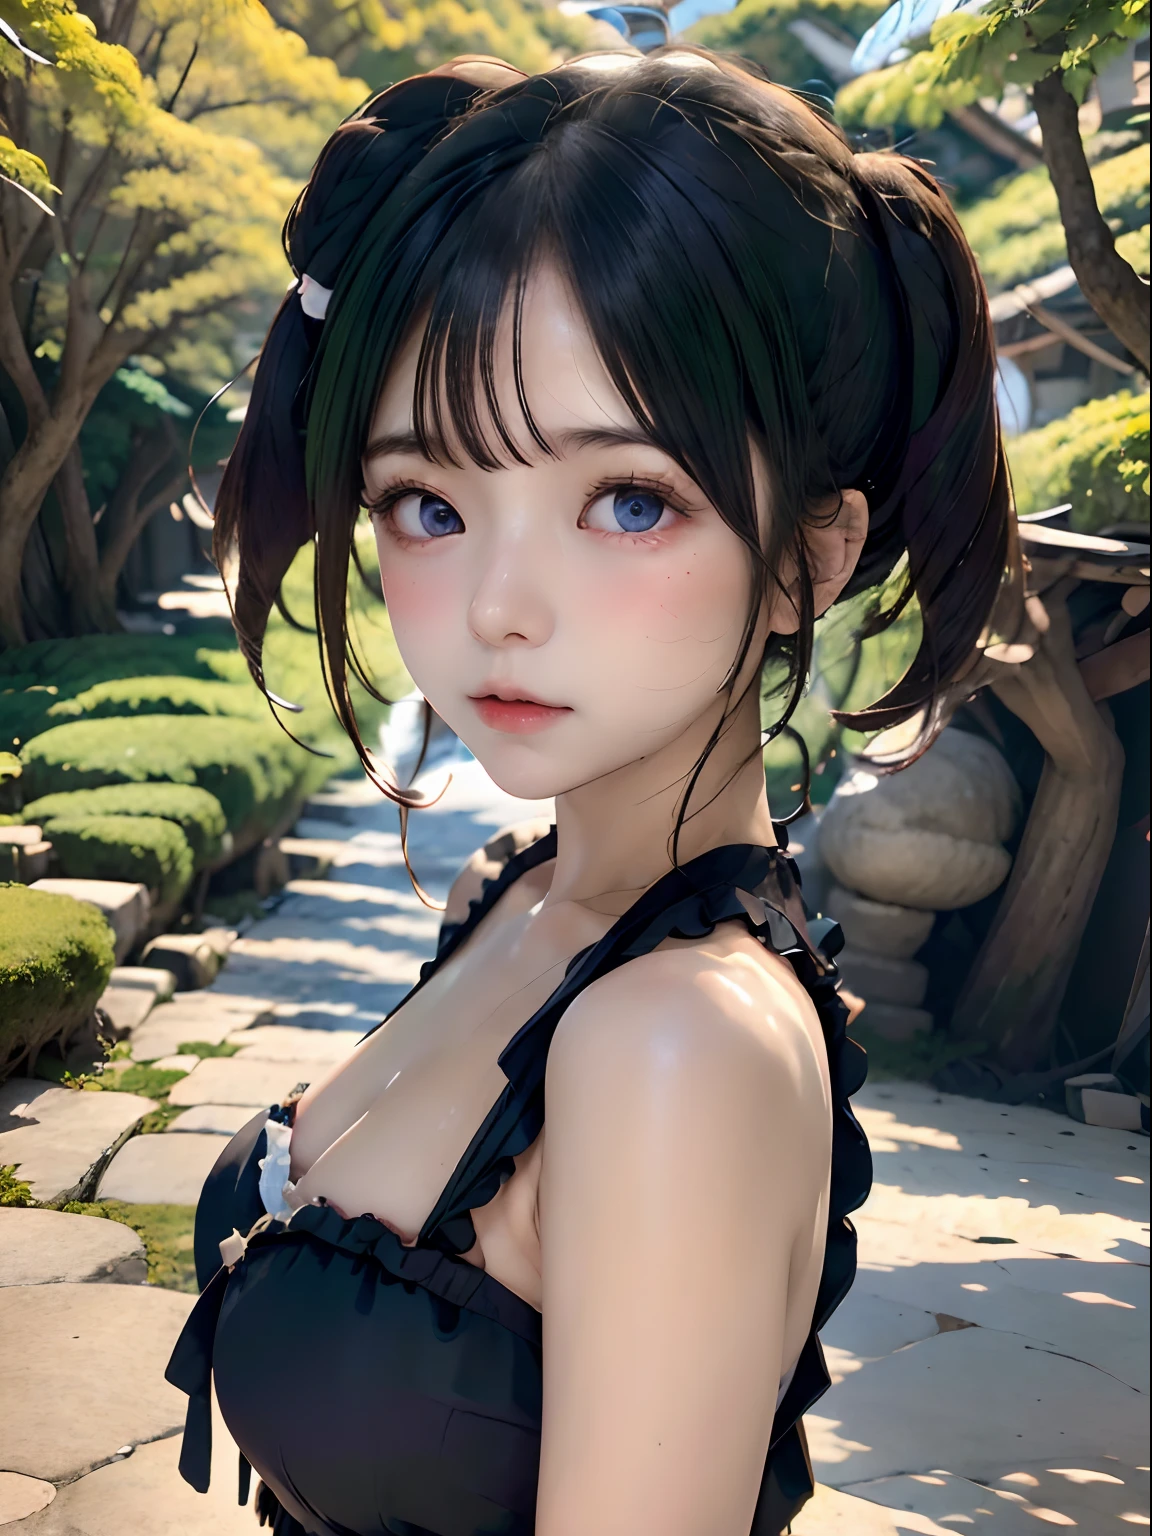 (Best Quality:1.3),(masutepiece:1.3),(Illustration:1.3),(Ultra-detailed:1.3),(imid shot:0.9),, , , 1girl in,Solo,Very young,Upper body,short neck,Small breasts,, , From Side,From below,close-up,, , , Purple eyes,Eyes Like Gems,extremely detailed eye,extra detailed face,(Seductive smile:0.8),(Open mouth:0.3),, , , Filthy flow, Turbid water, Garbage floating, Rotten stench, Unforgettable melodies, Scattered syringes, Contaminated mysteries, Abandoned tranquility, The Forgotten Path, Pebble riverbed , Twin-tailed, maid,Green hair,